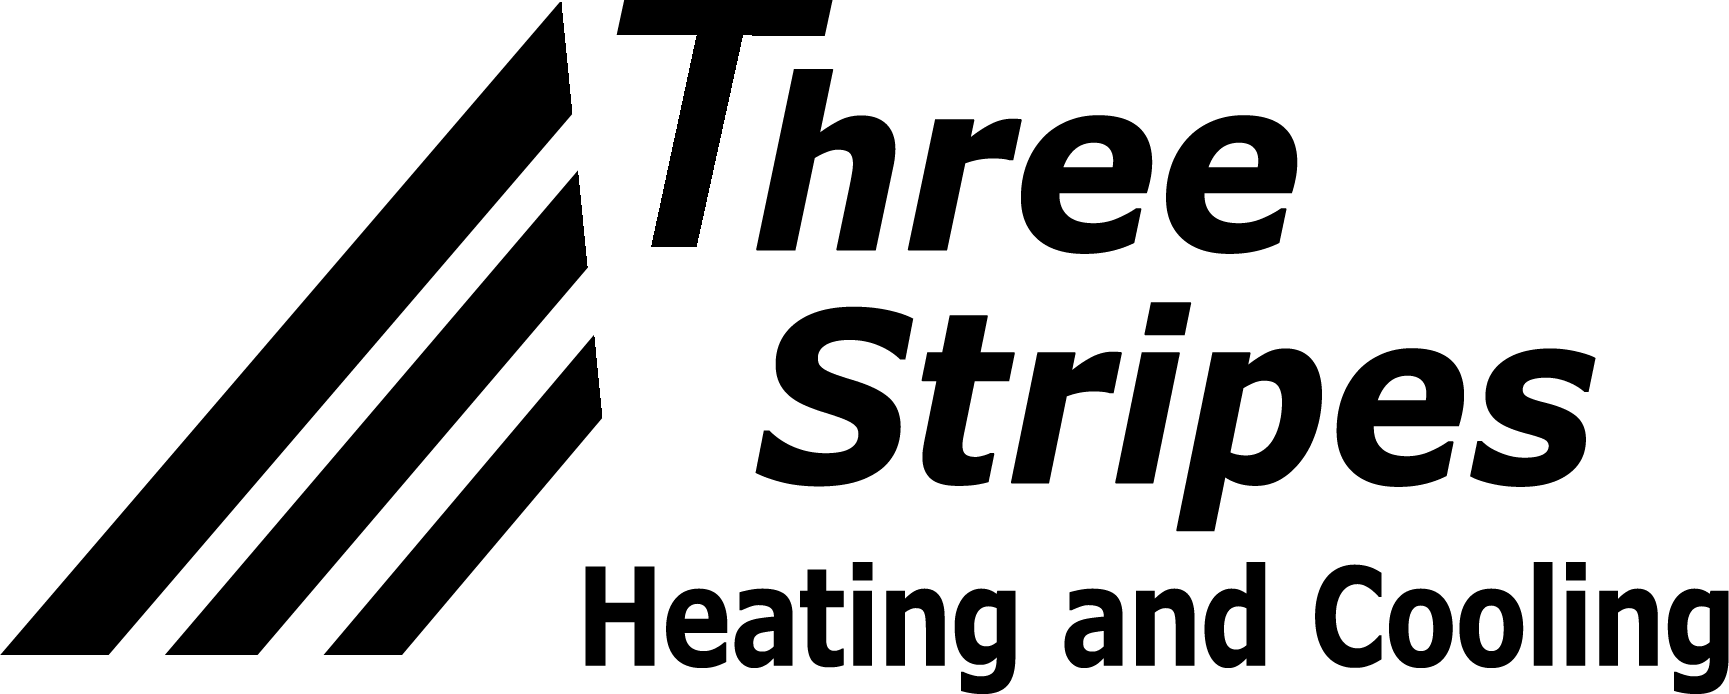 Furnace Repair Service Dearborn MI | Three Stripes Heating and Cooling, Inc.